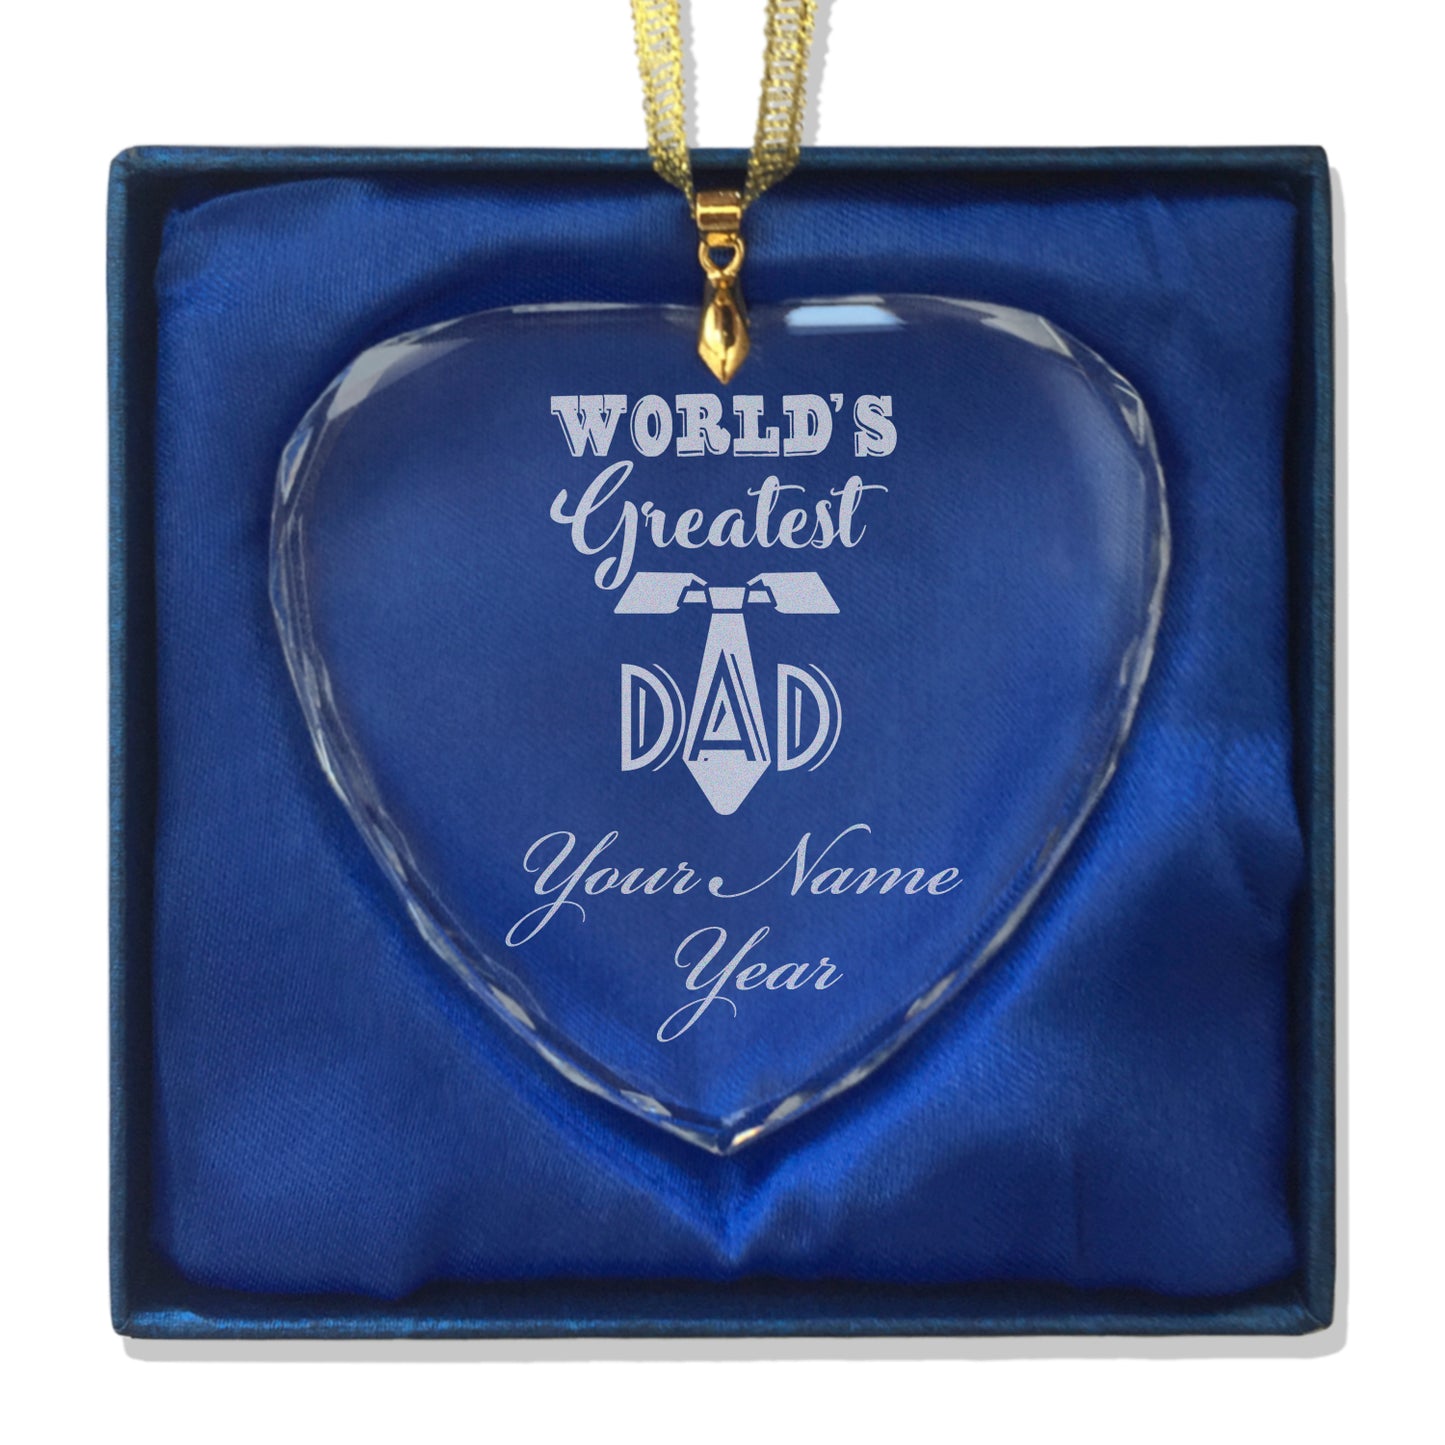 LaserGram Christmas Ornament, World's Greatest Dad, Personalized Engraving Included (Heart Shape)